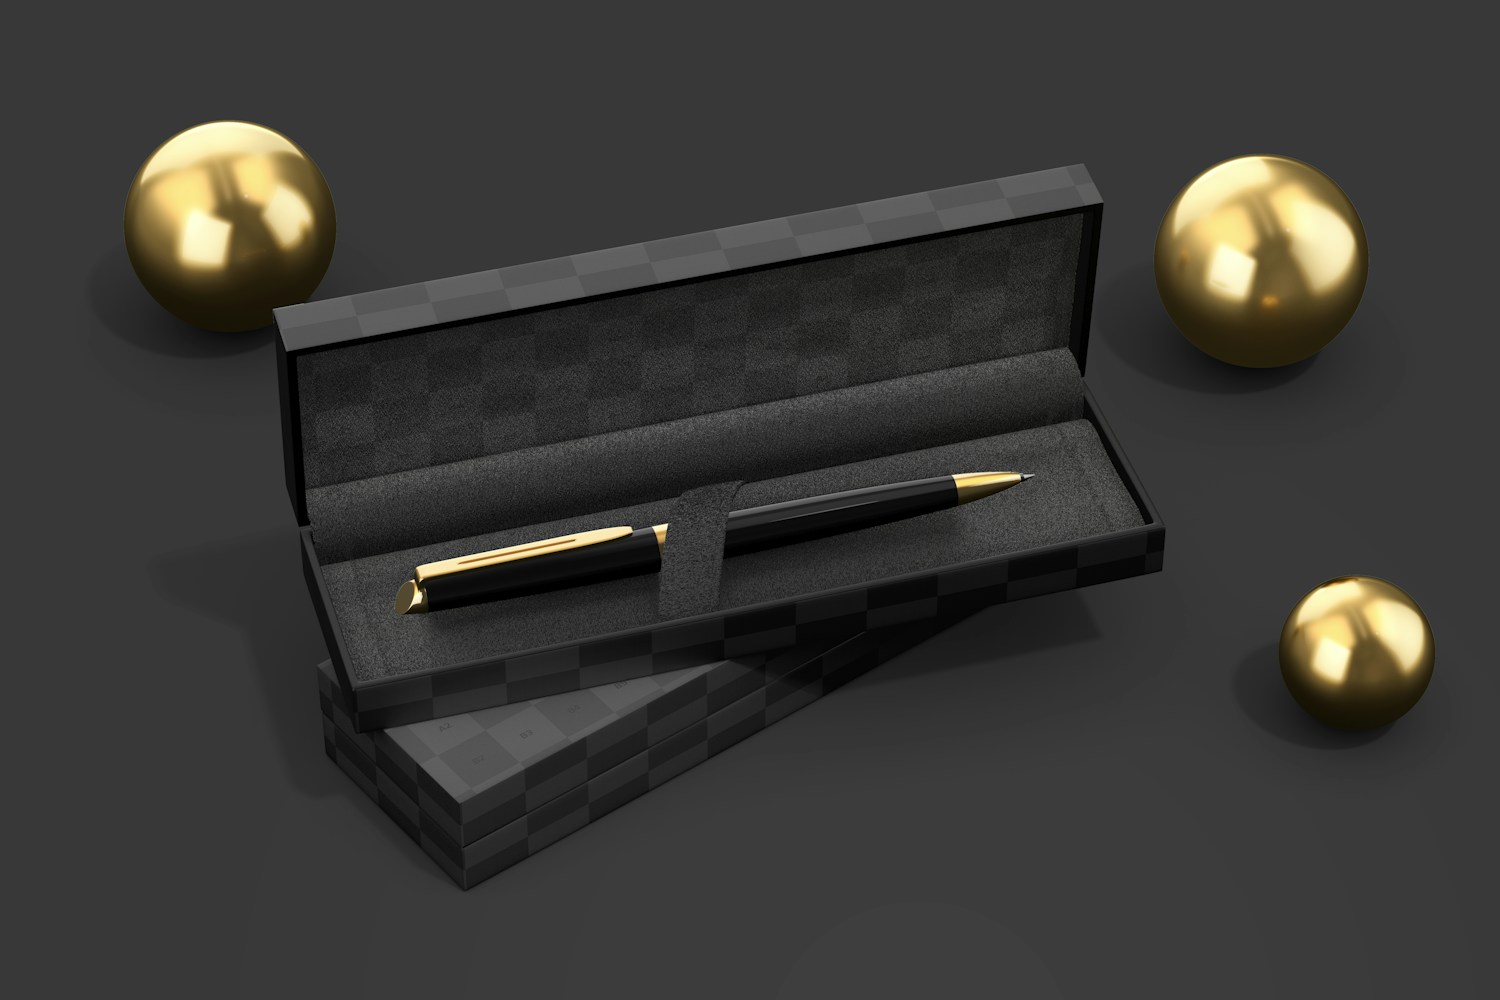 Golden Pen in Boxes Mockup, Perspective